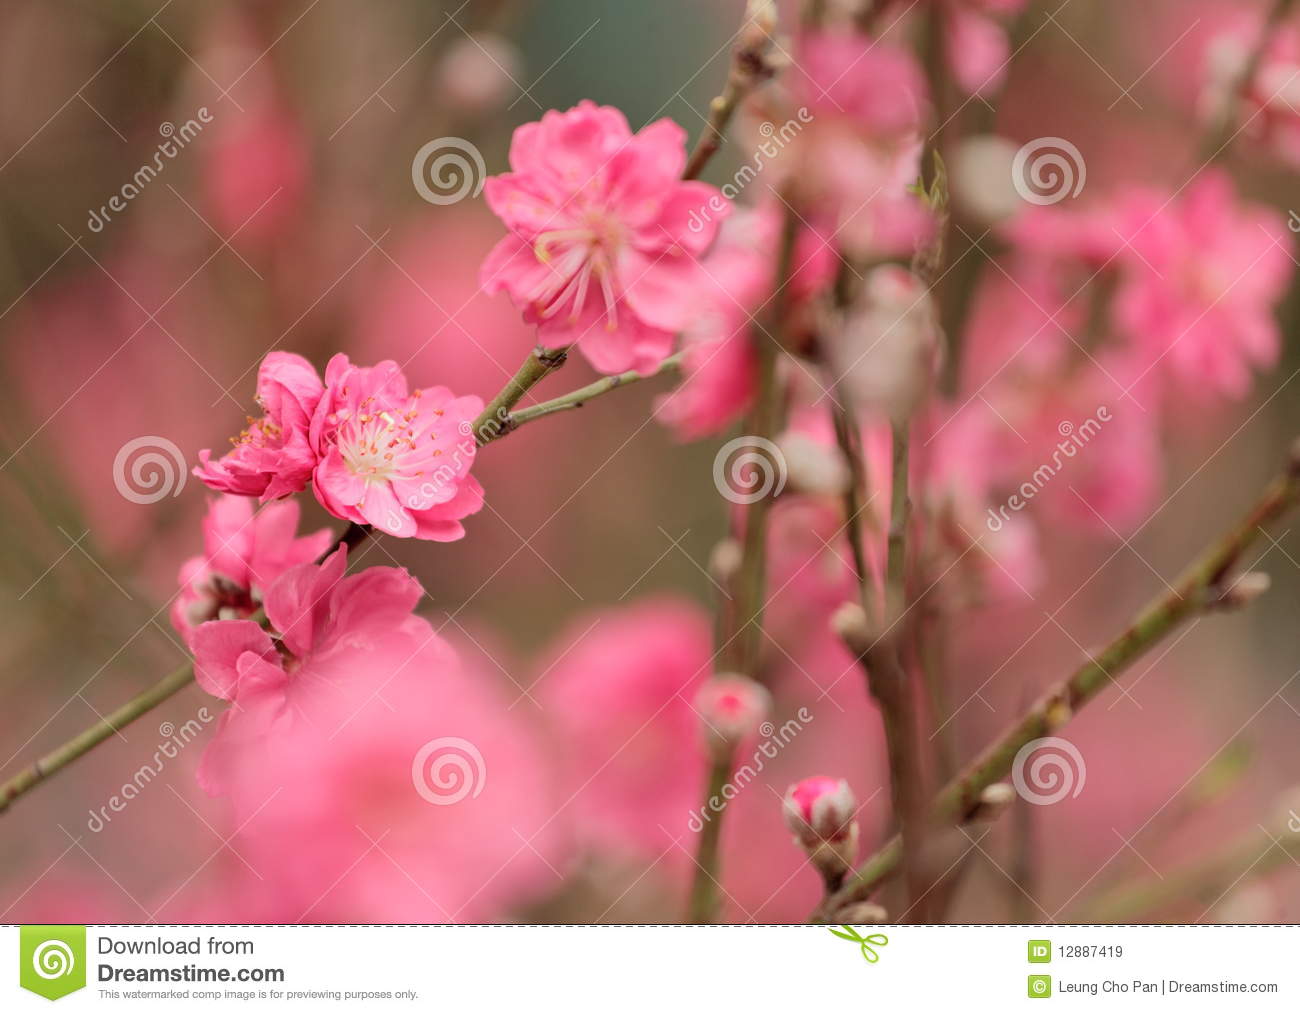 Peach Blossom Royalty Free Stock Images   Image  12887419